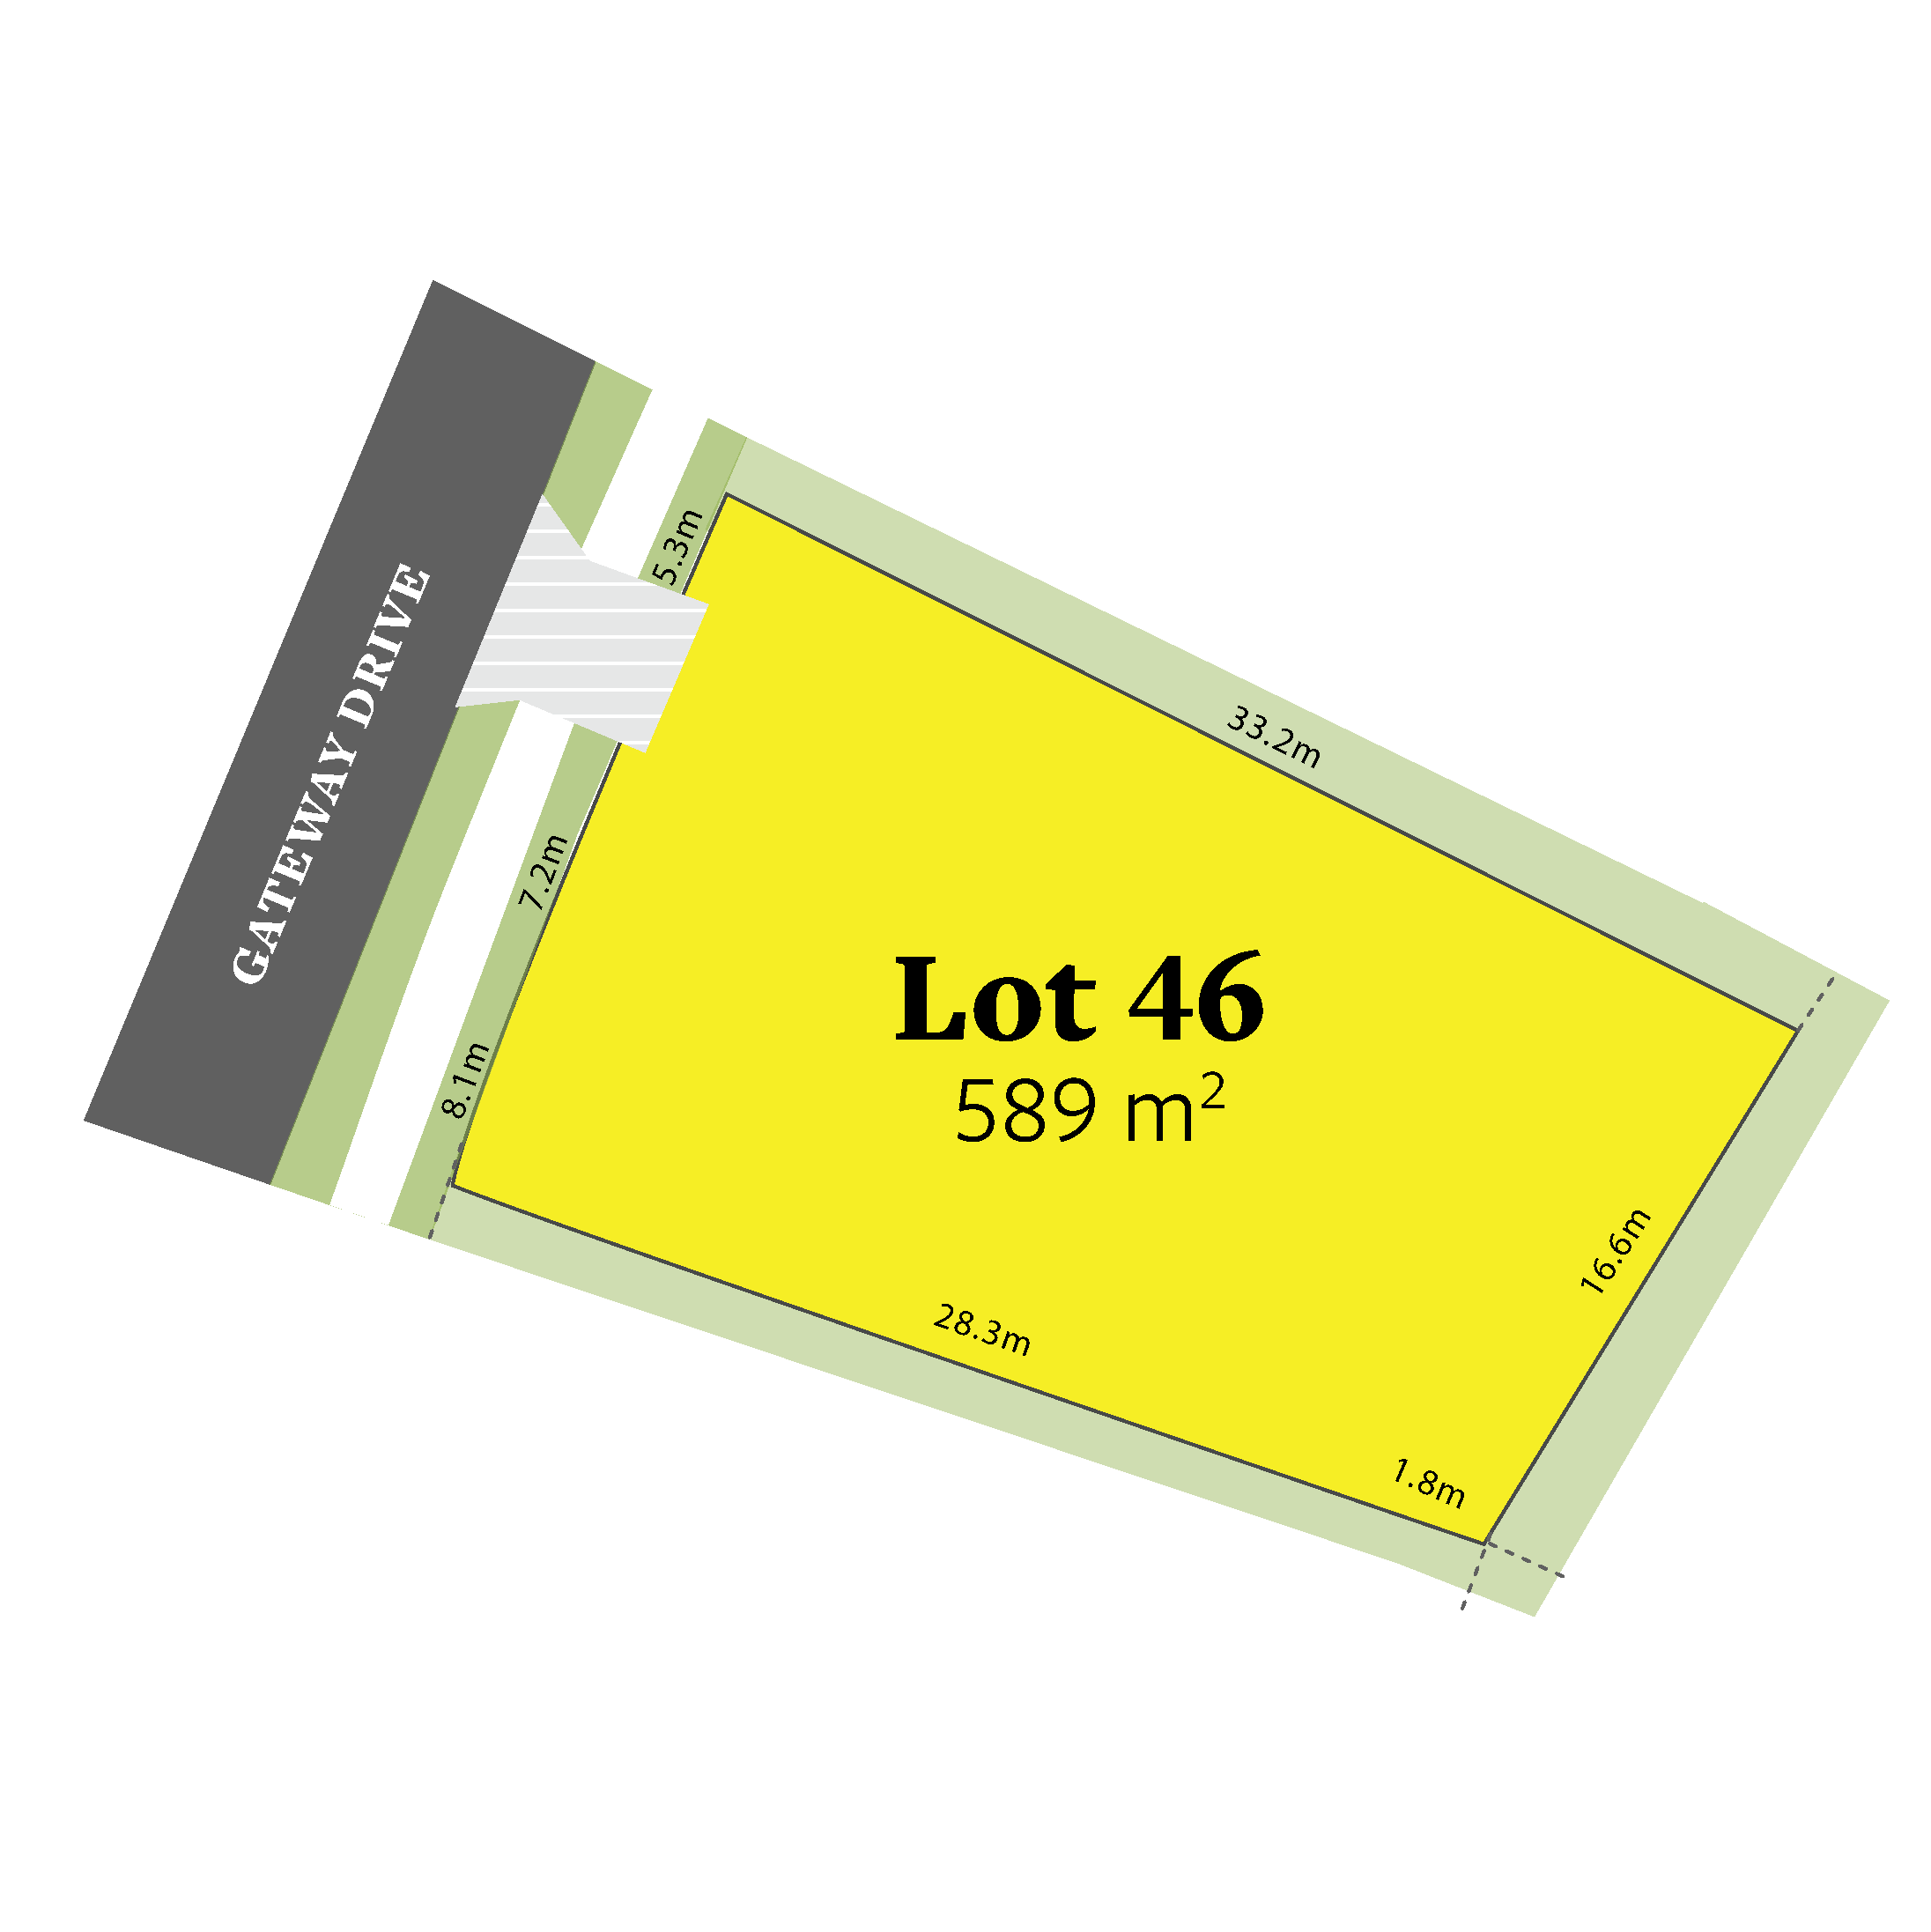 Image of Lot 46